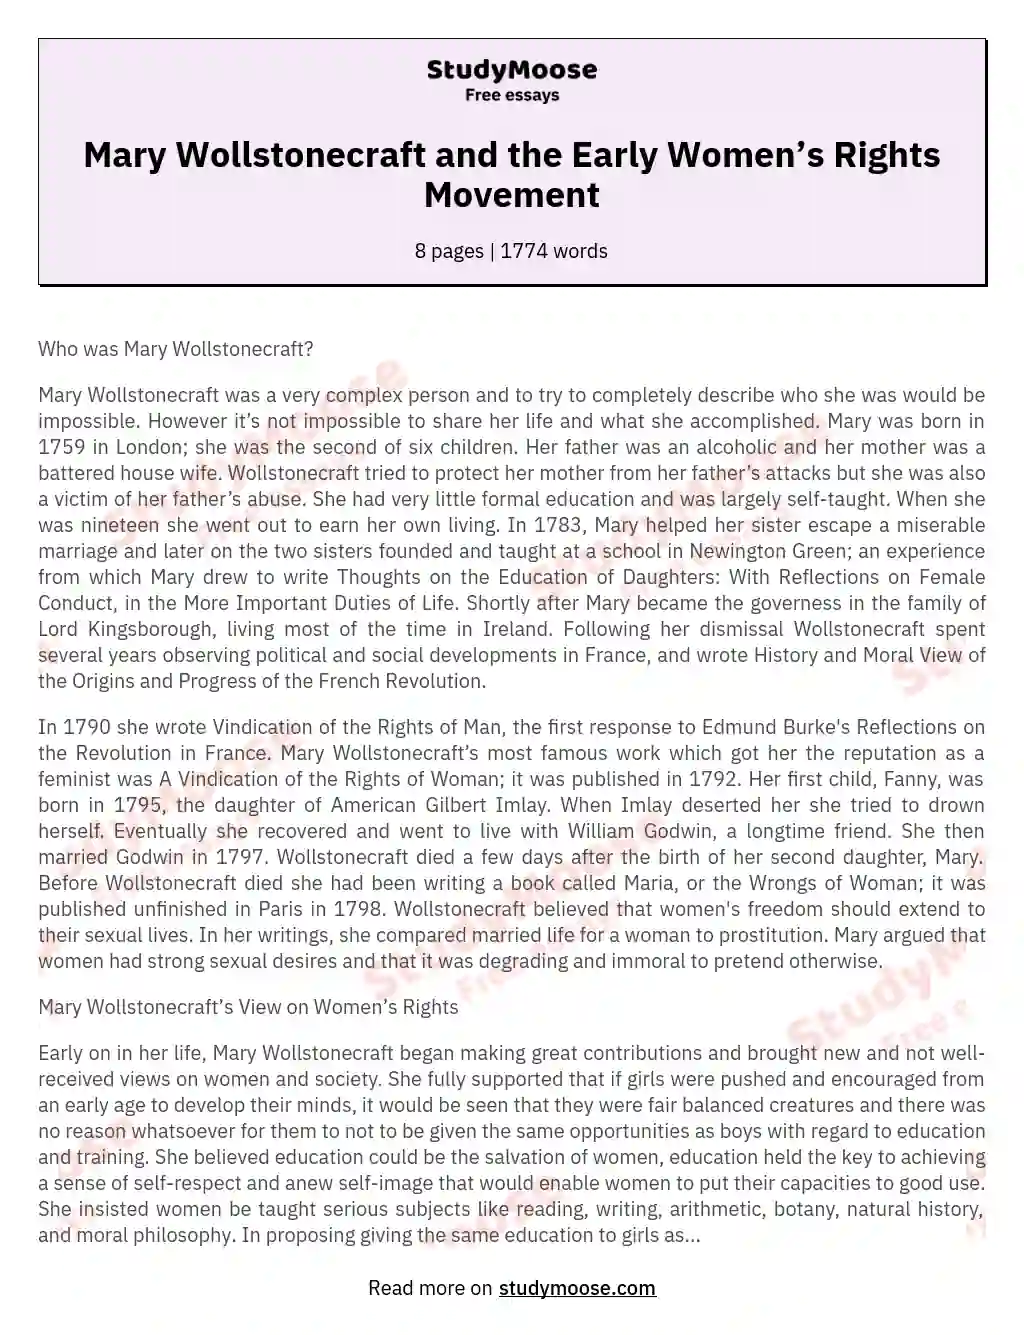 Mary Wollstonecraft and the Early Women’s Rights Movement essay